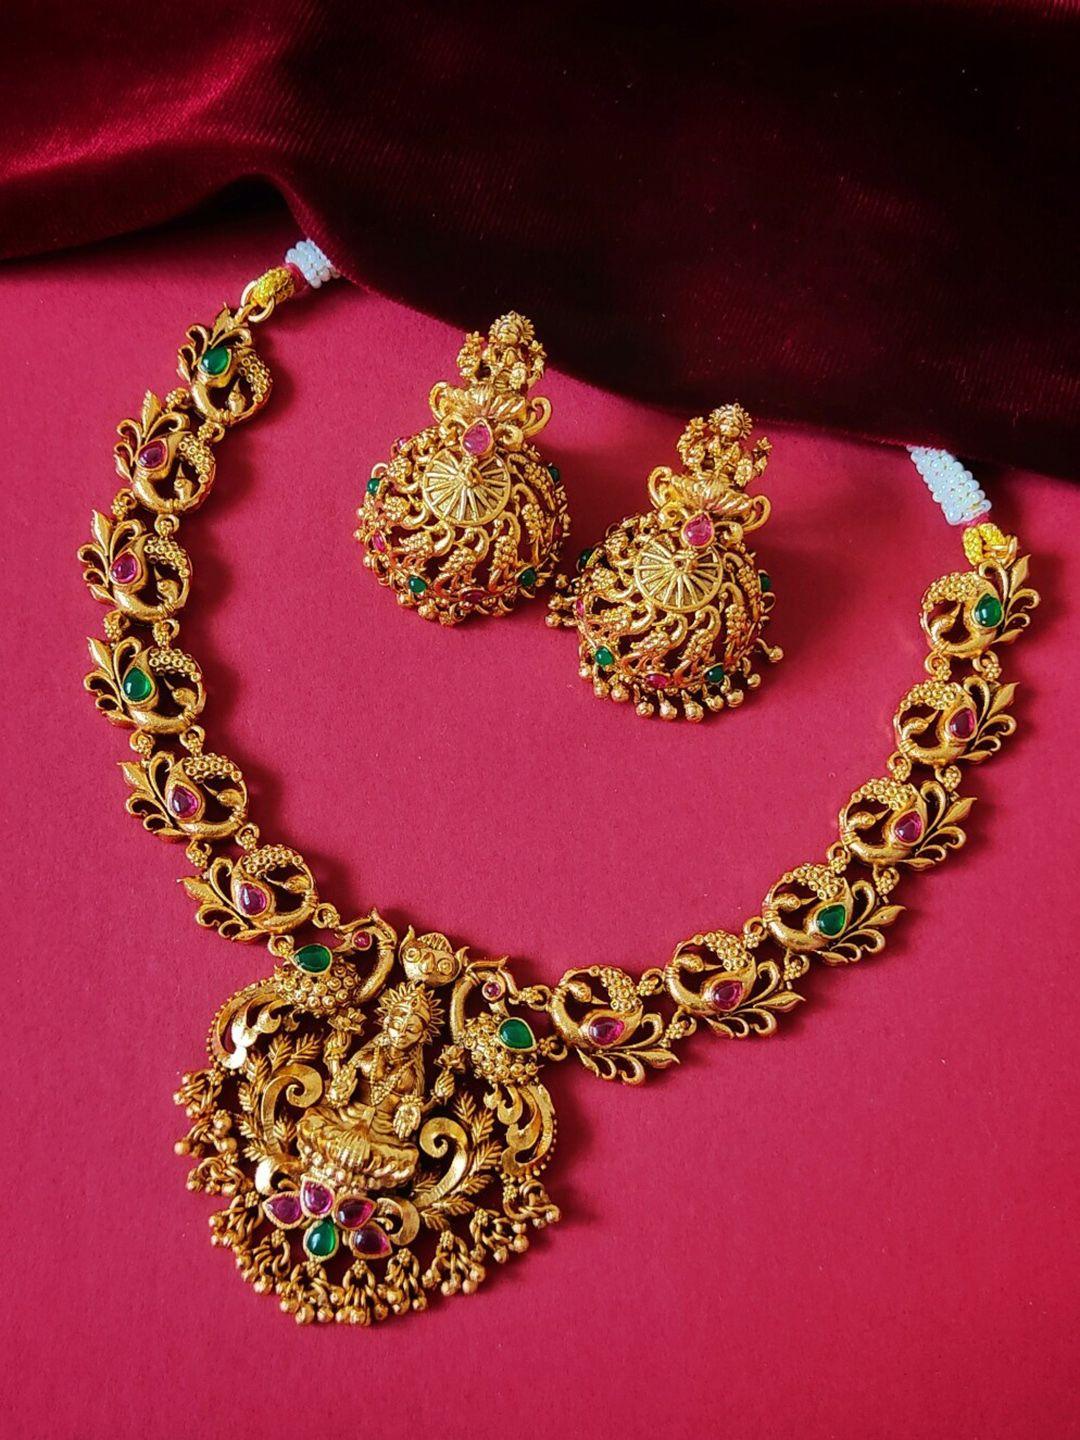 pihtara jewels gold-plated stones-studded & beaded necklace and earrings